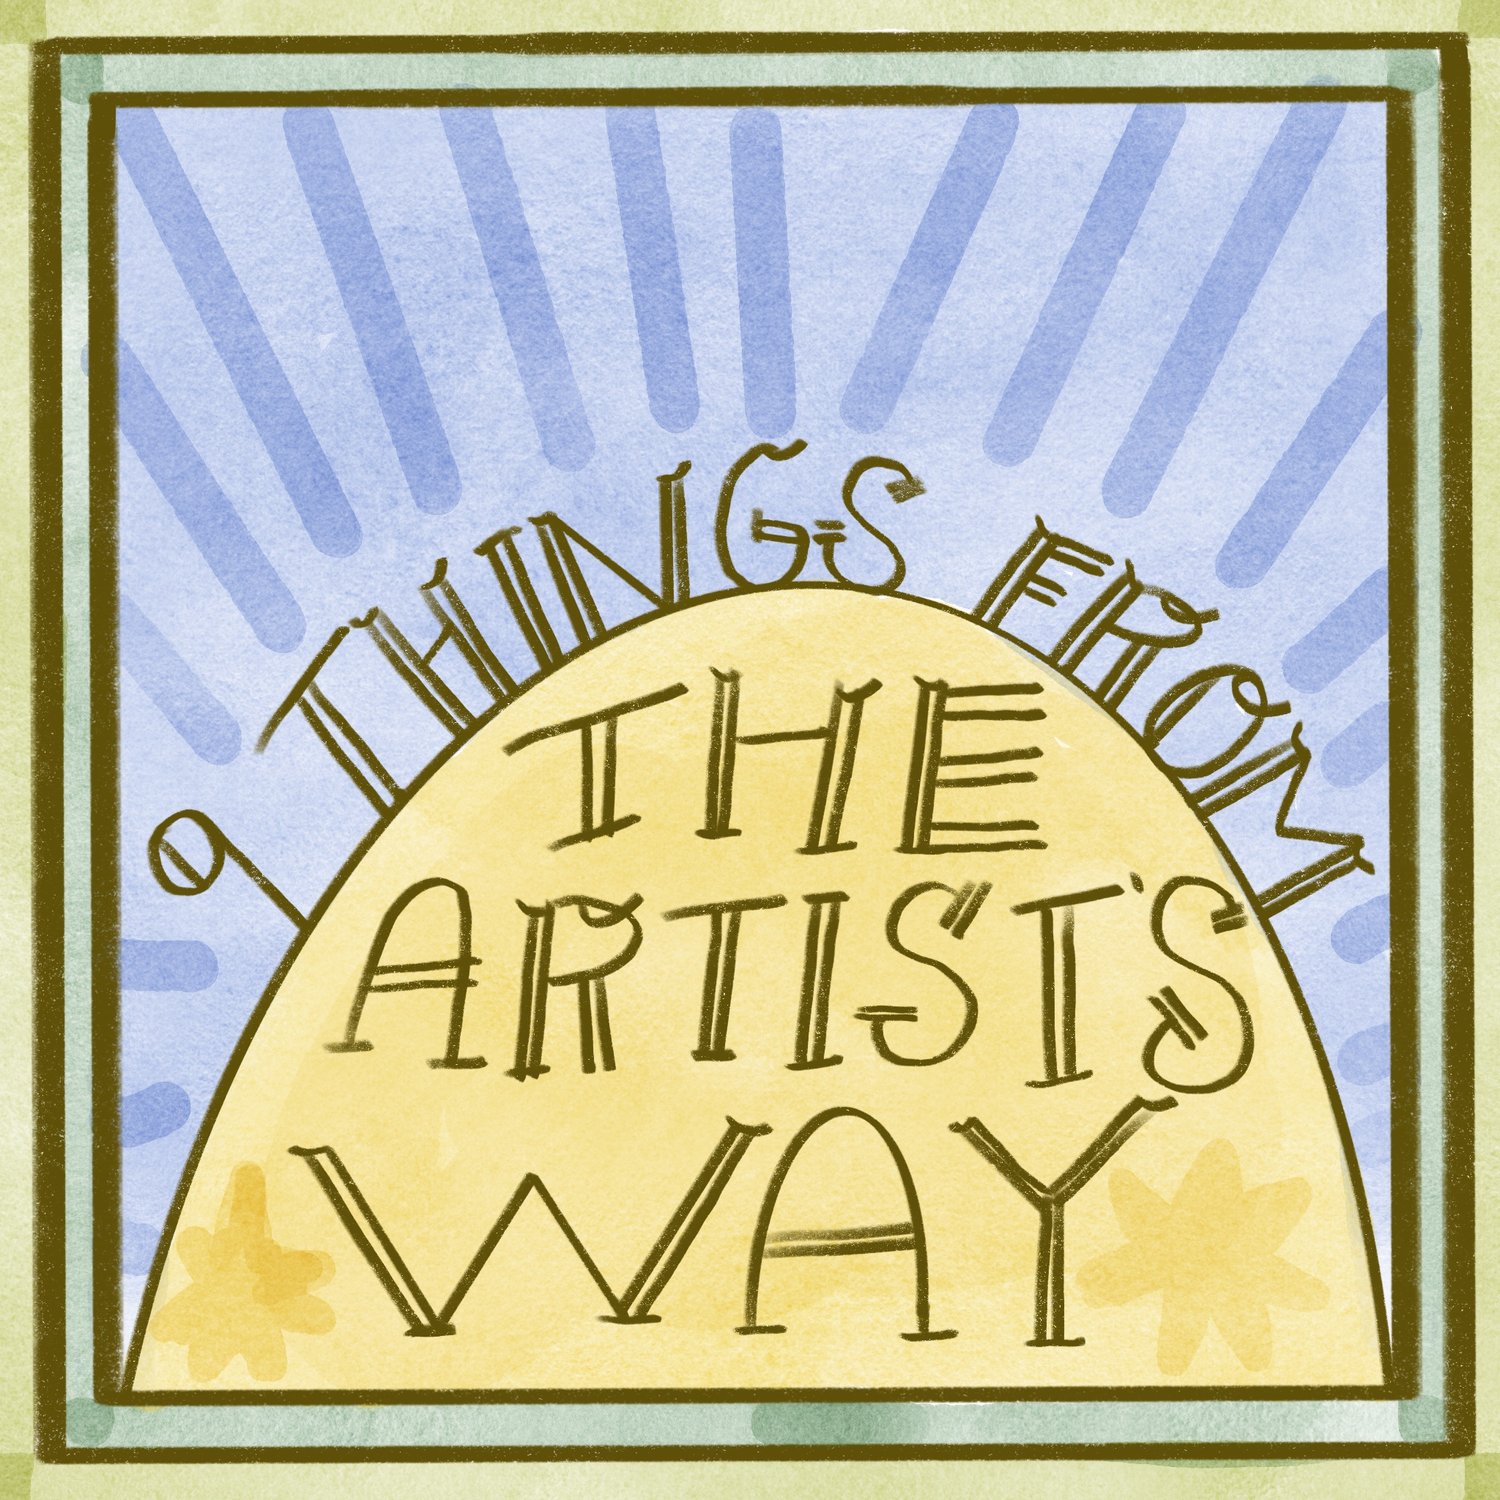 Consider: 9 Points from The Artist's Way by Julia Cameron